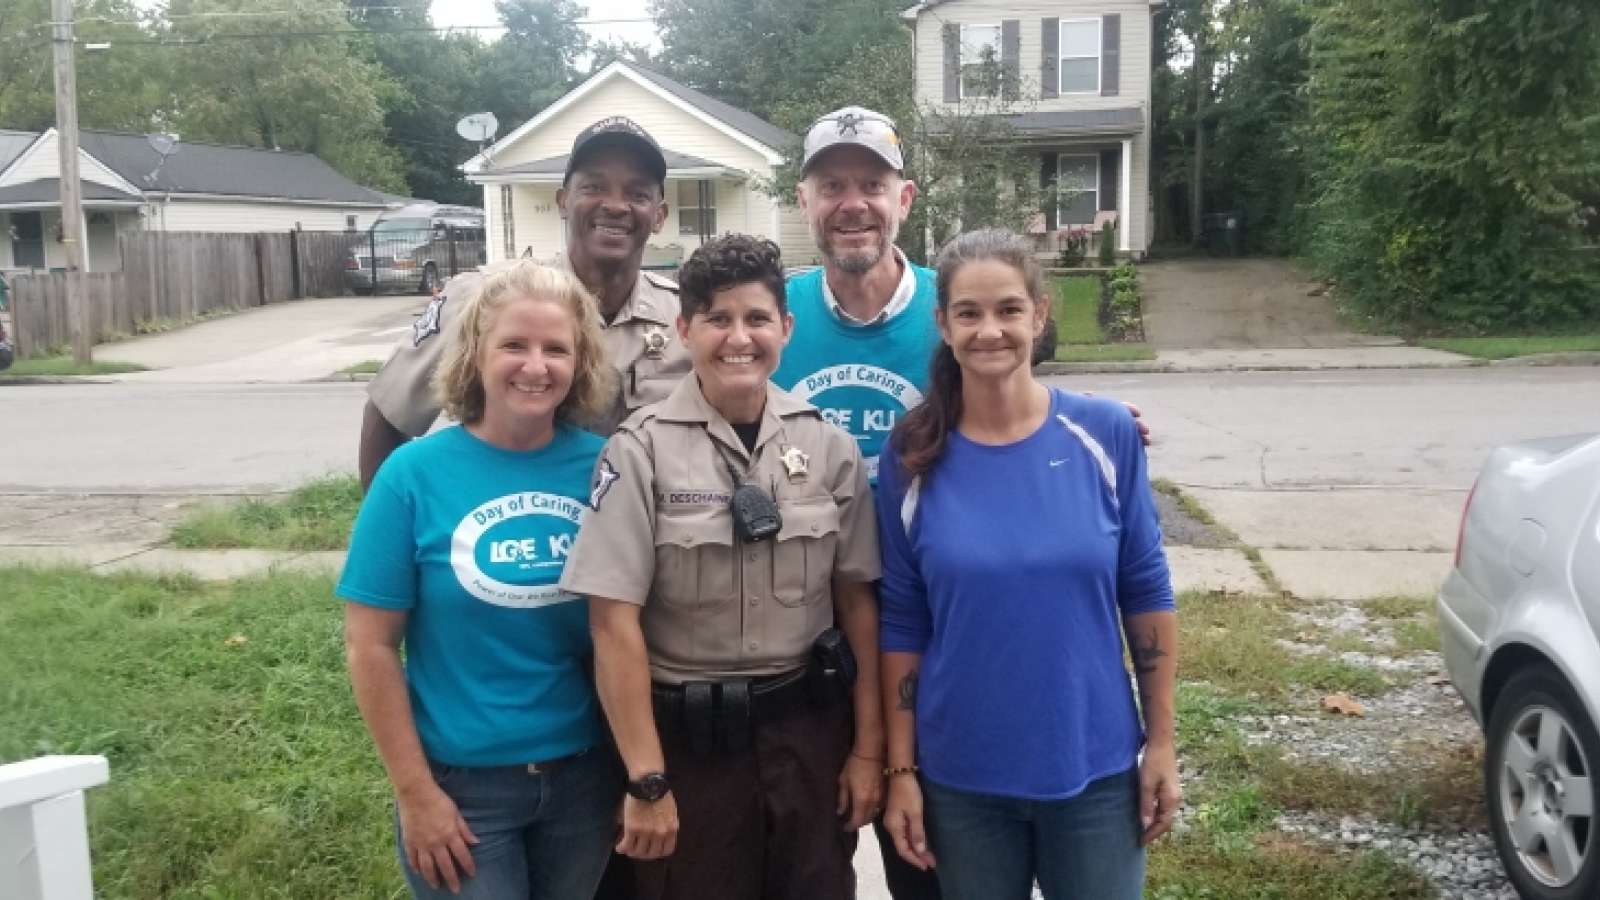 KU employees and sheriff deputy participating in community event